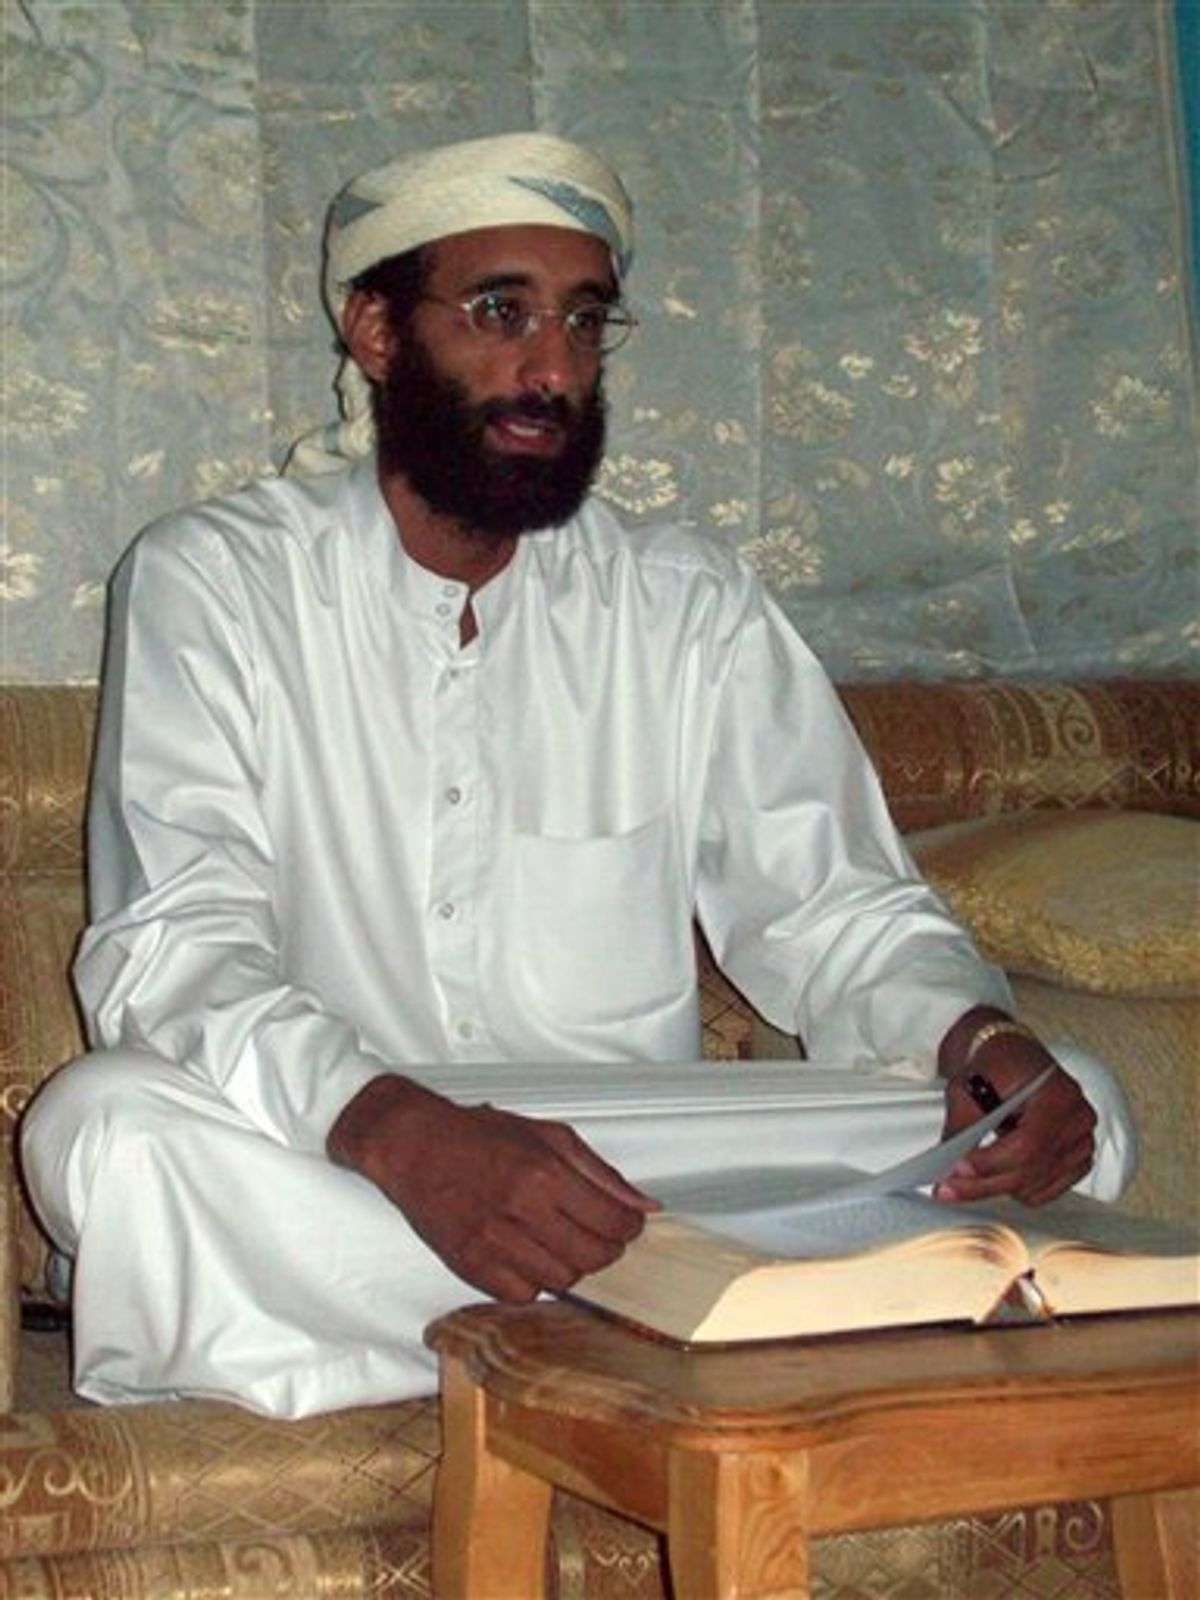 FILE - This Oct. 2008 file photo shows Imam Anwar al-Awlaki, a U.S.-born Yemeni cleric and recruiter for al-Qaida in the Arabian Peninsula, in Yemen. Born in New Mexico, al-Awlaki has used his personal website to encourage Muslims around the world to kill U.S. troops in Iraq and has emerged as a prominent and has been tied by U.S. intelligence to the 9/11 hijackers, Umar Farouk Abdulmutallab the underwear bomber, as well as Maj. Nidal Malik Hasan, the Army psychiatrist accused of killing 13 people in November at Fort Hood, Texas. (AP Photo/Muhammad ud-Deen, File) MANDATORY CREDIT  NO SALES   (AP)